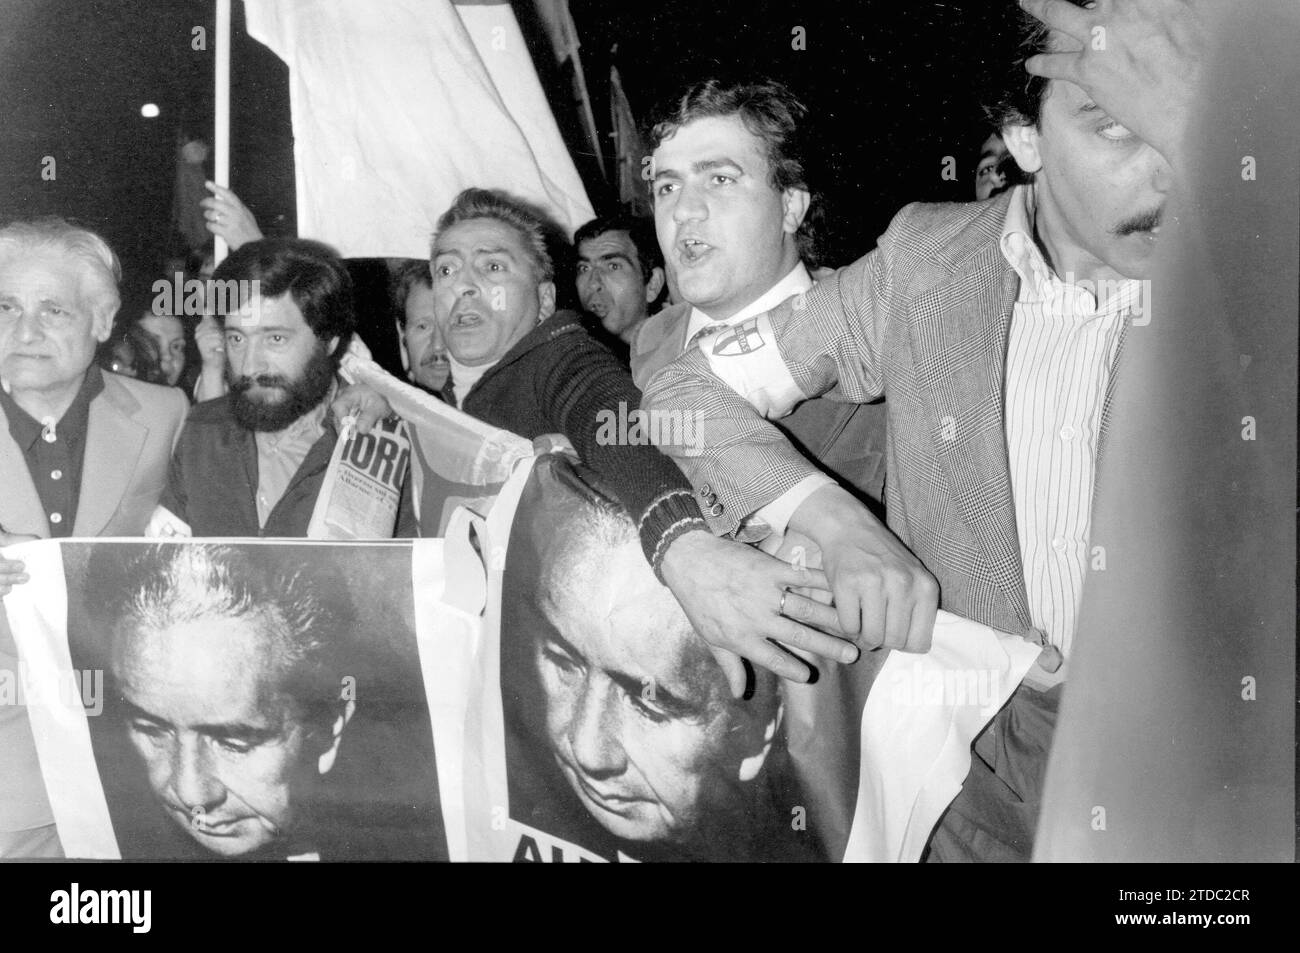 05/08/1978. Demonstration in Rome for the murder of Aldo Moro by the Red Brigades. Credit: Album / Archivo ABC Stock Photo